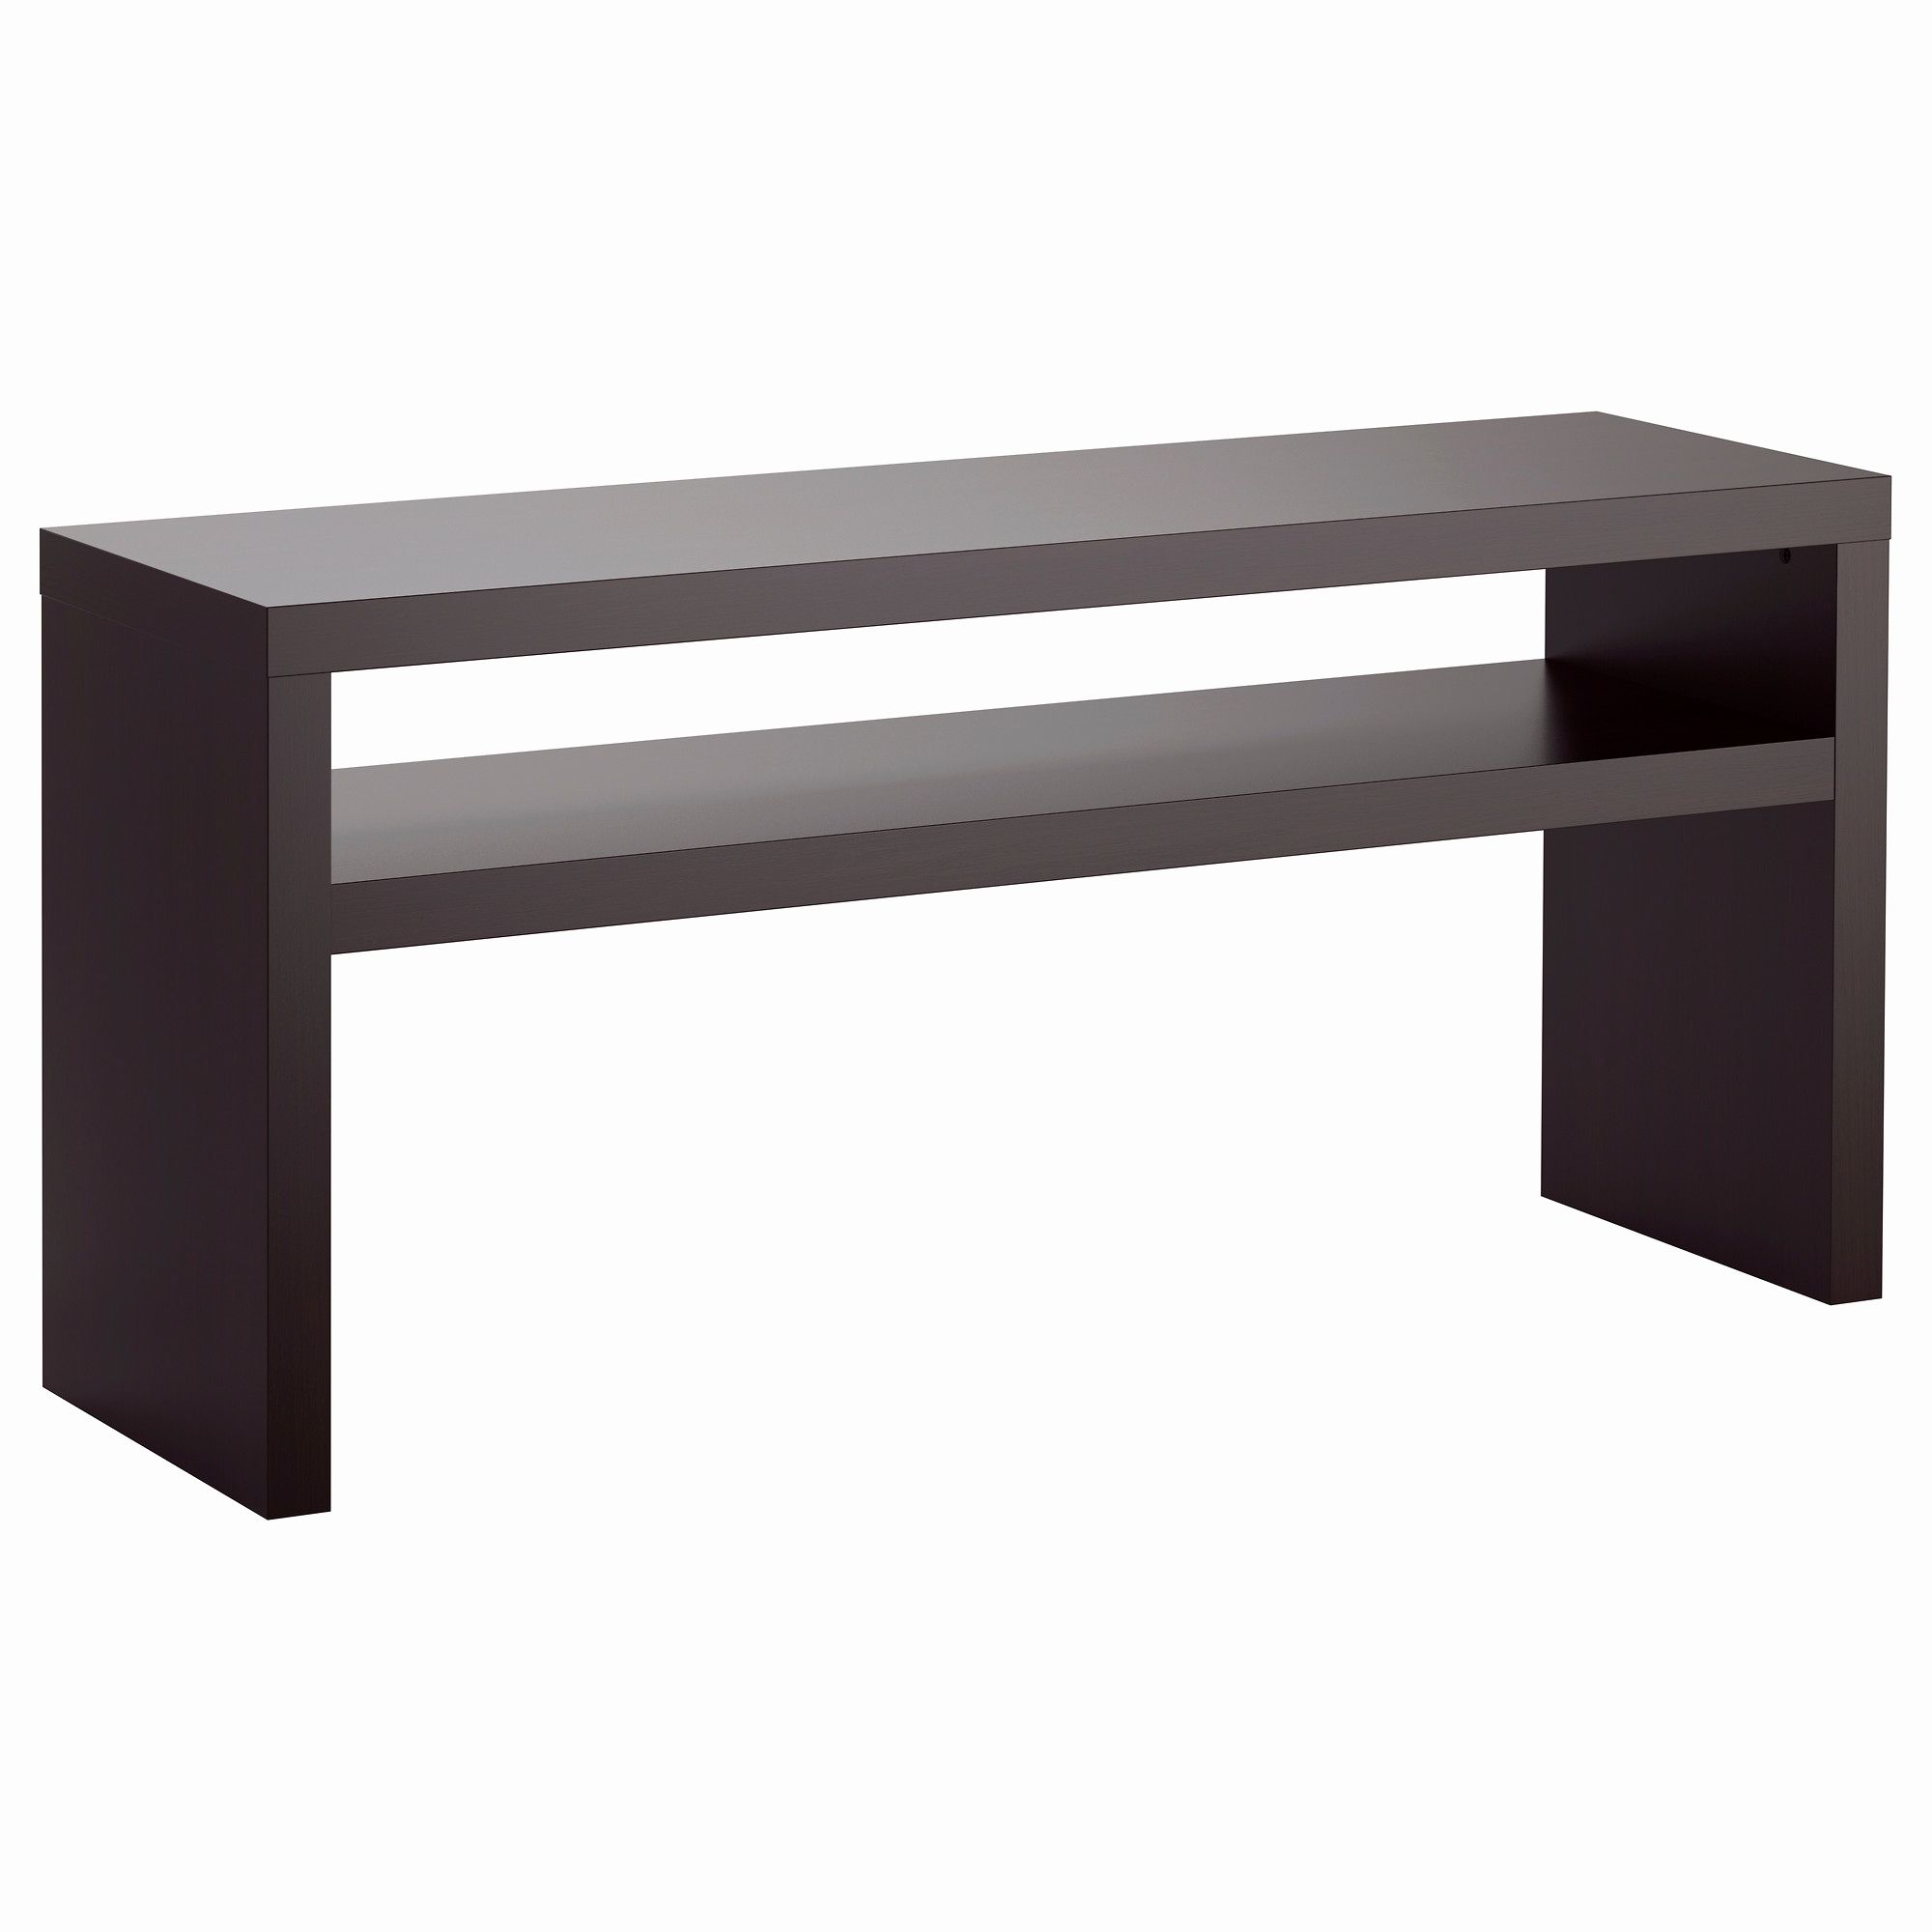 84 Inch Sofa Table Outstanding Console Tables Ikea Console Table For Silviano 84 Inch Console Tables (Gallery 1 of 20)